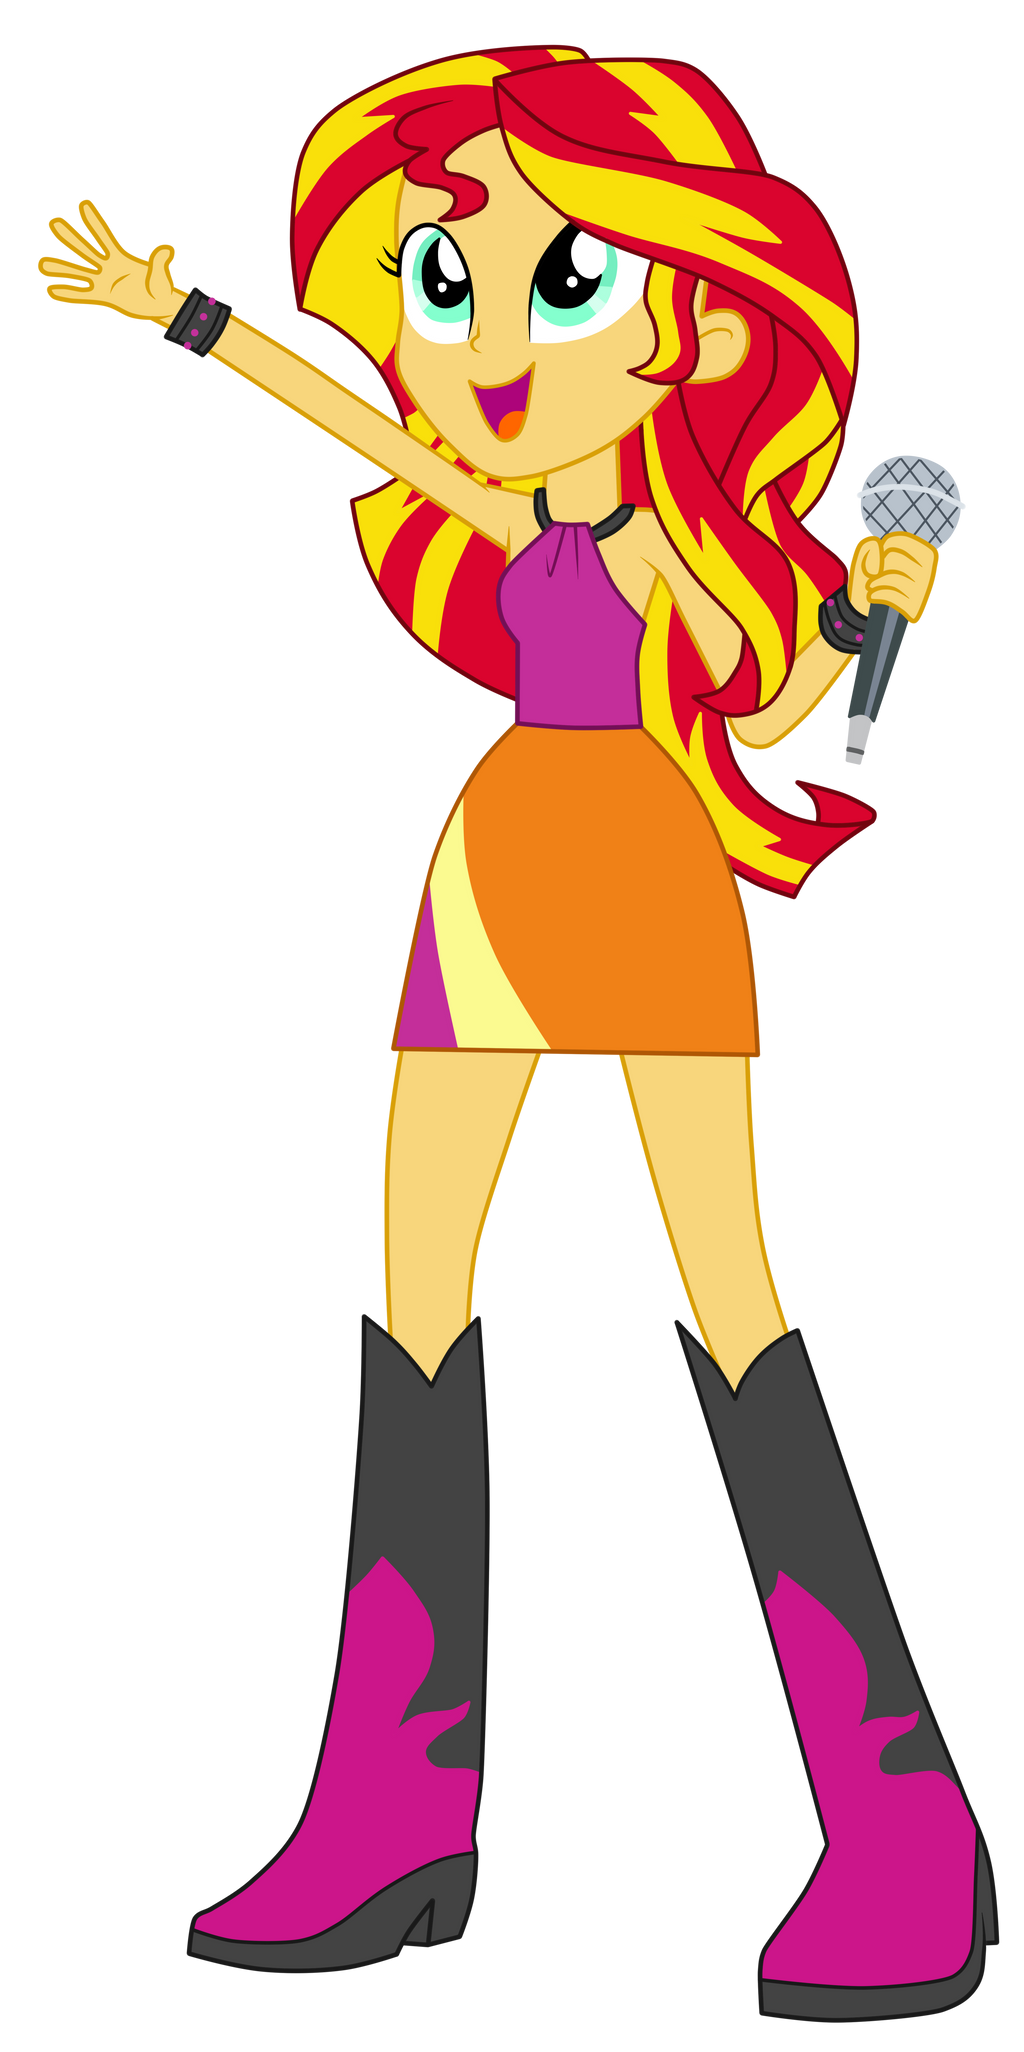 [Legend of Everfree] Sunset Shimmer by MixiePie on DeviantArt